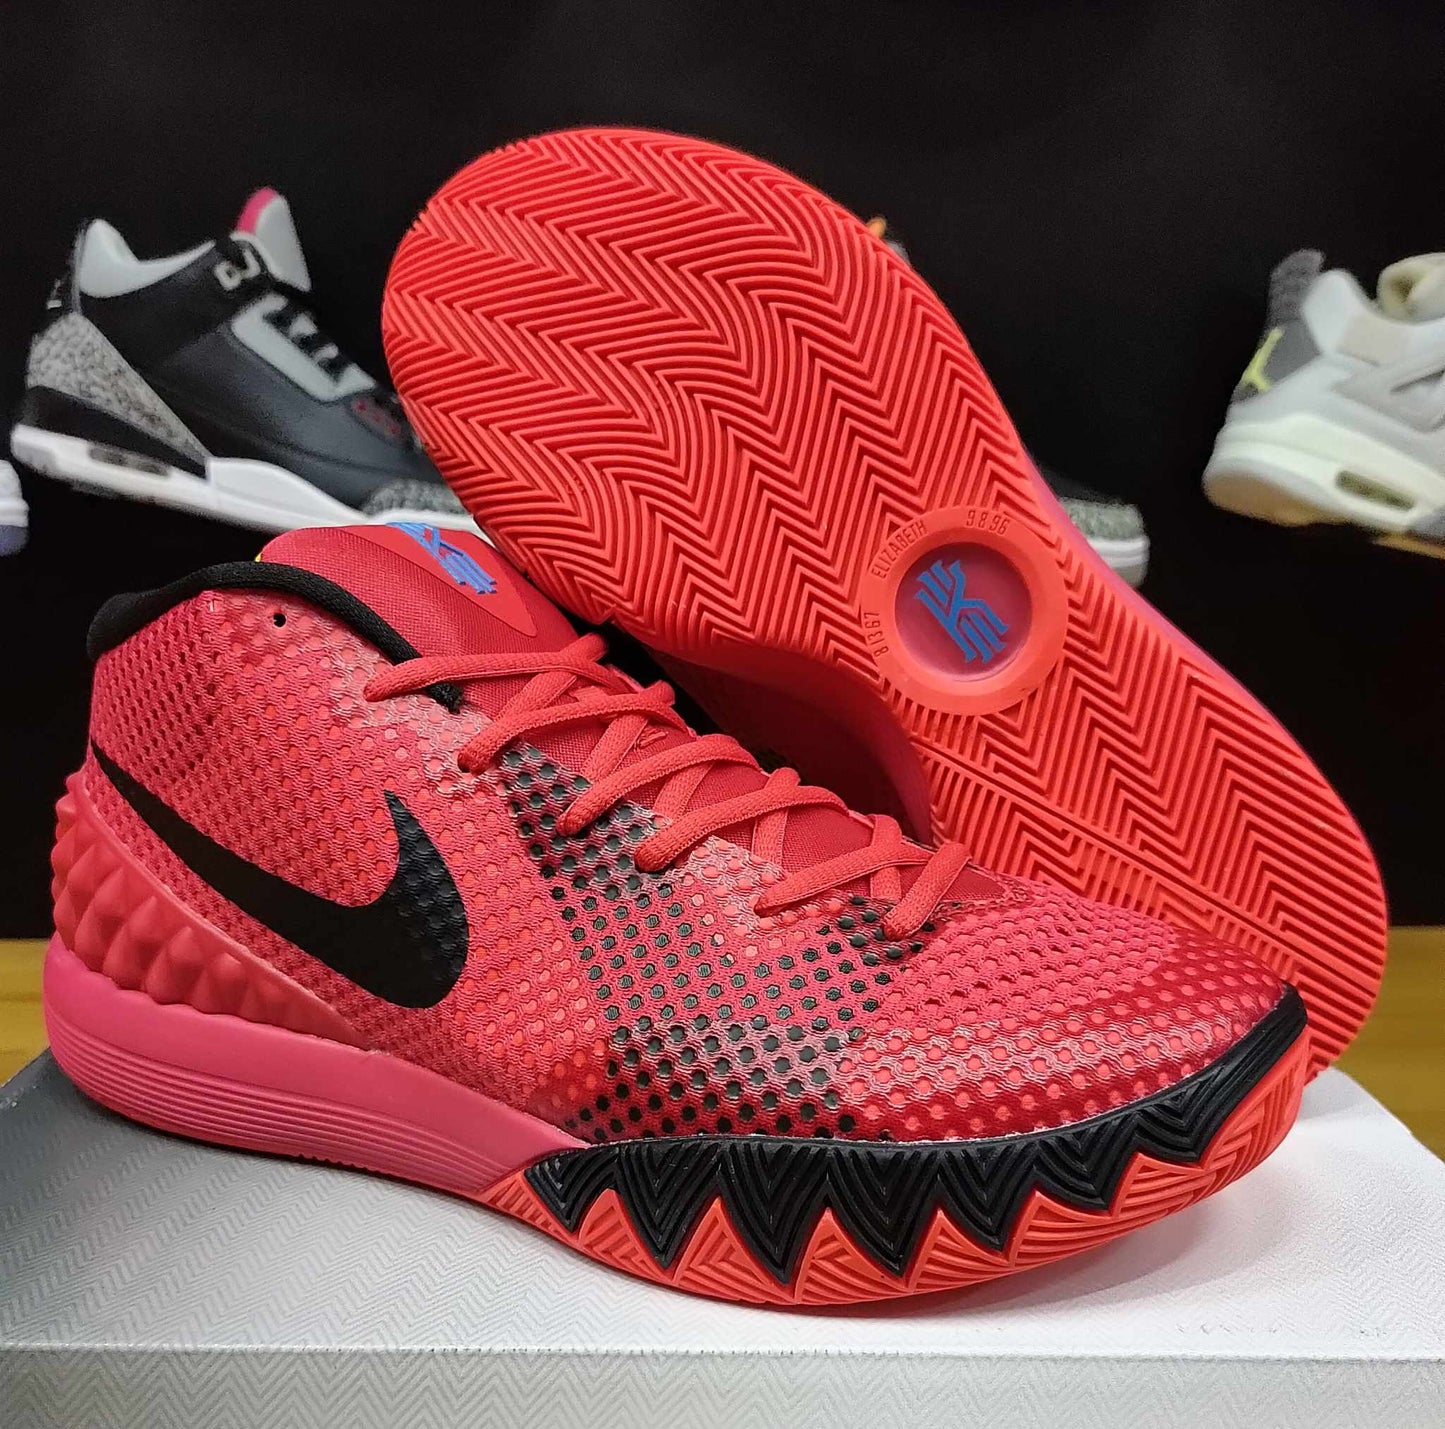 Kyrie1 "Deceptive Red"